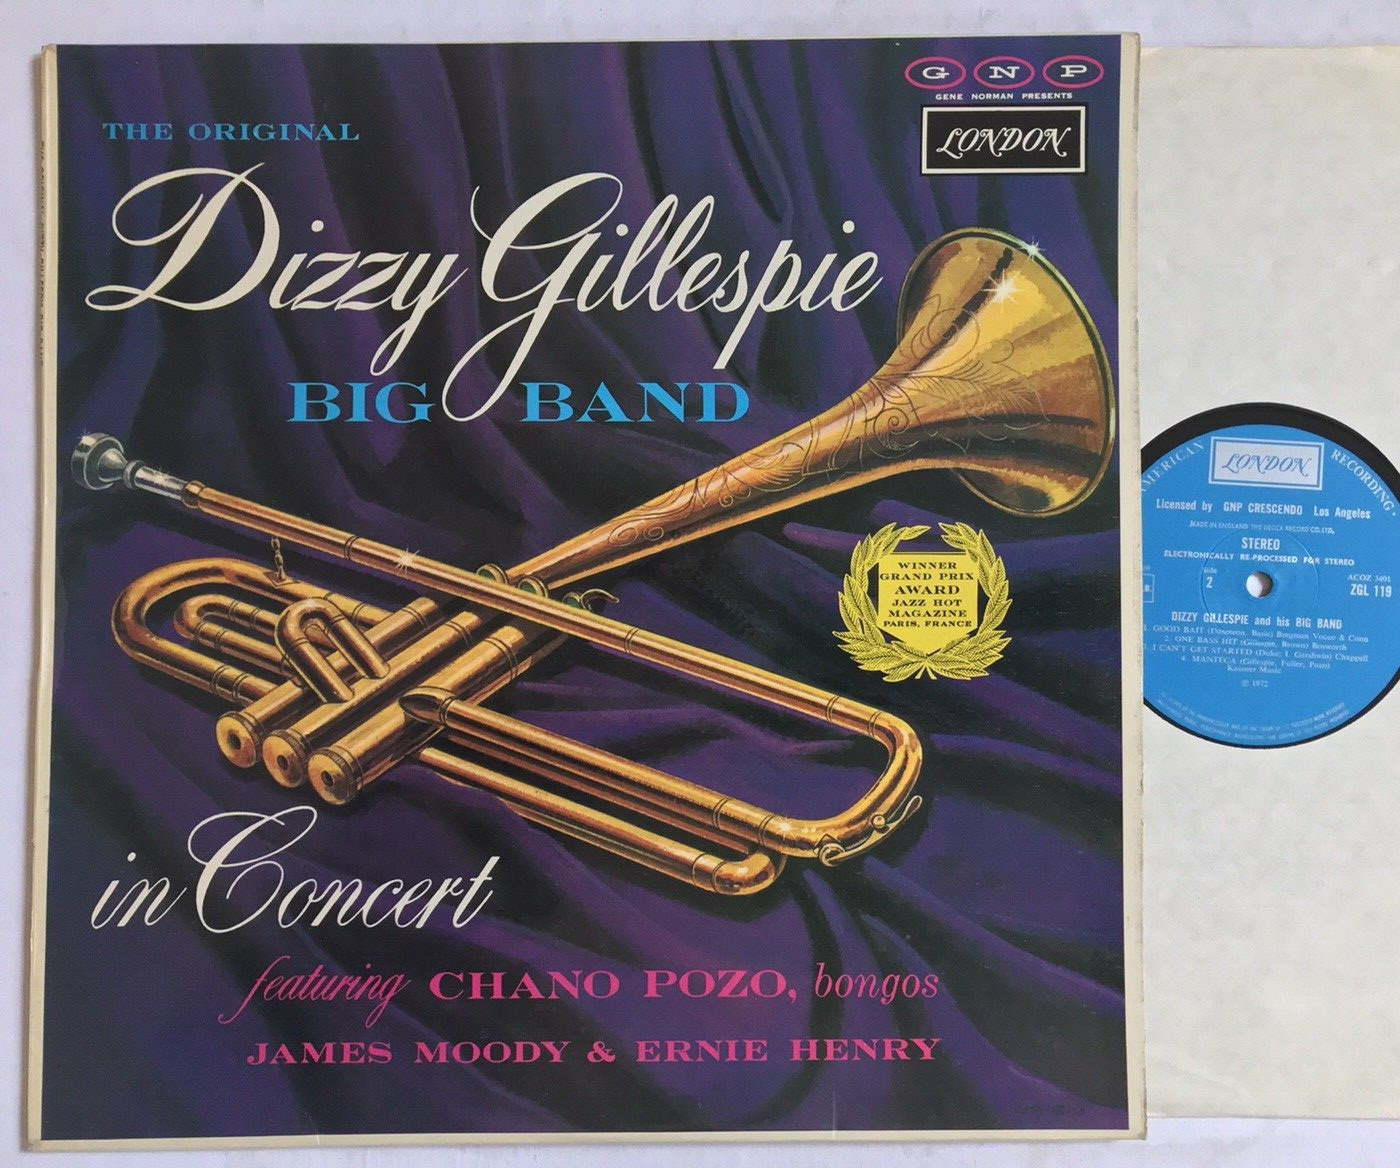 DIZZY GILLESPIE BIG BAND In Concert - Chano Pozo, James Moody & Ernie Henry